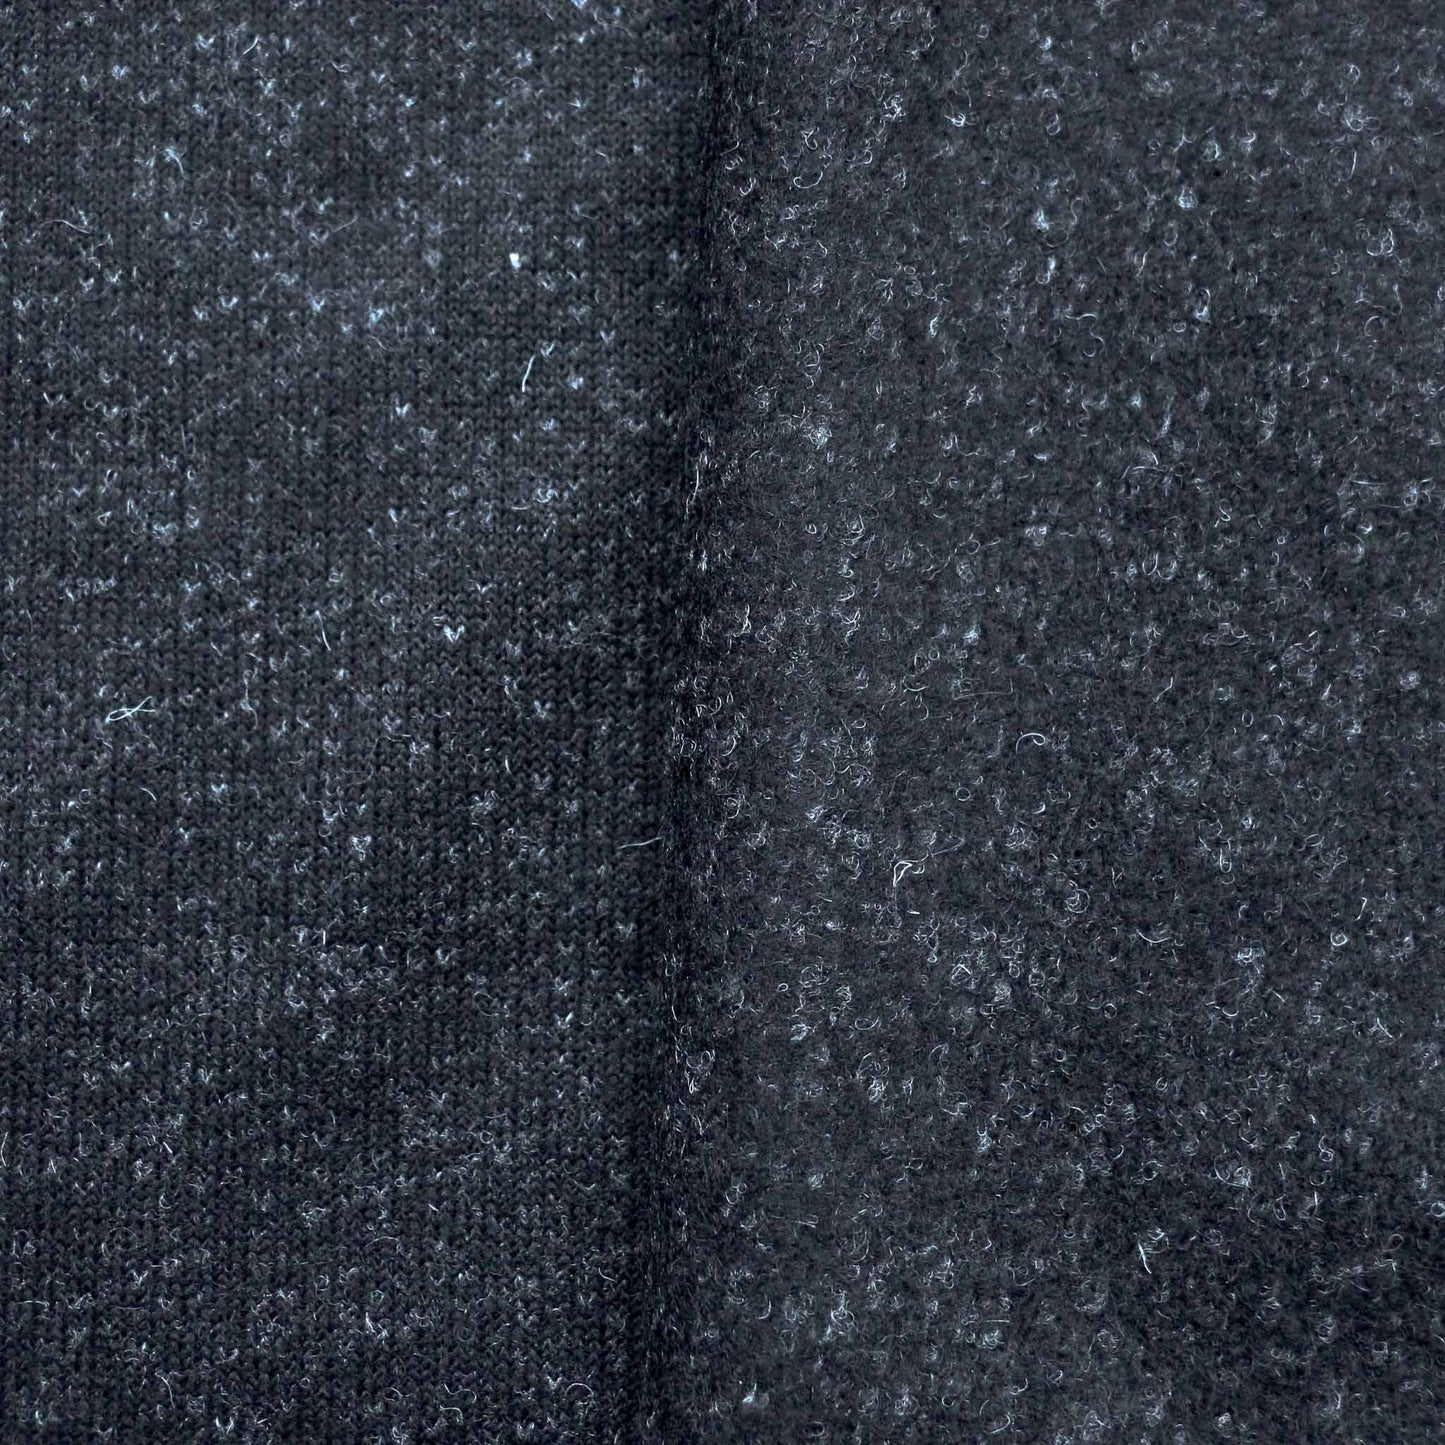 felt backed wool jersey knit dressmaking fabric in black and grey